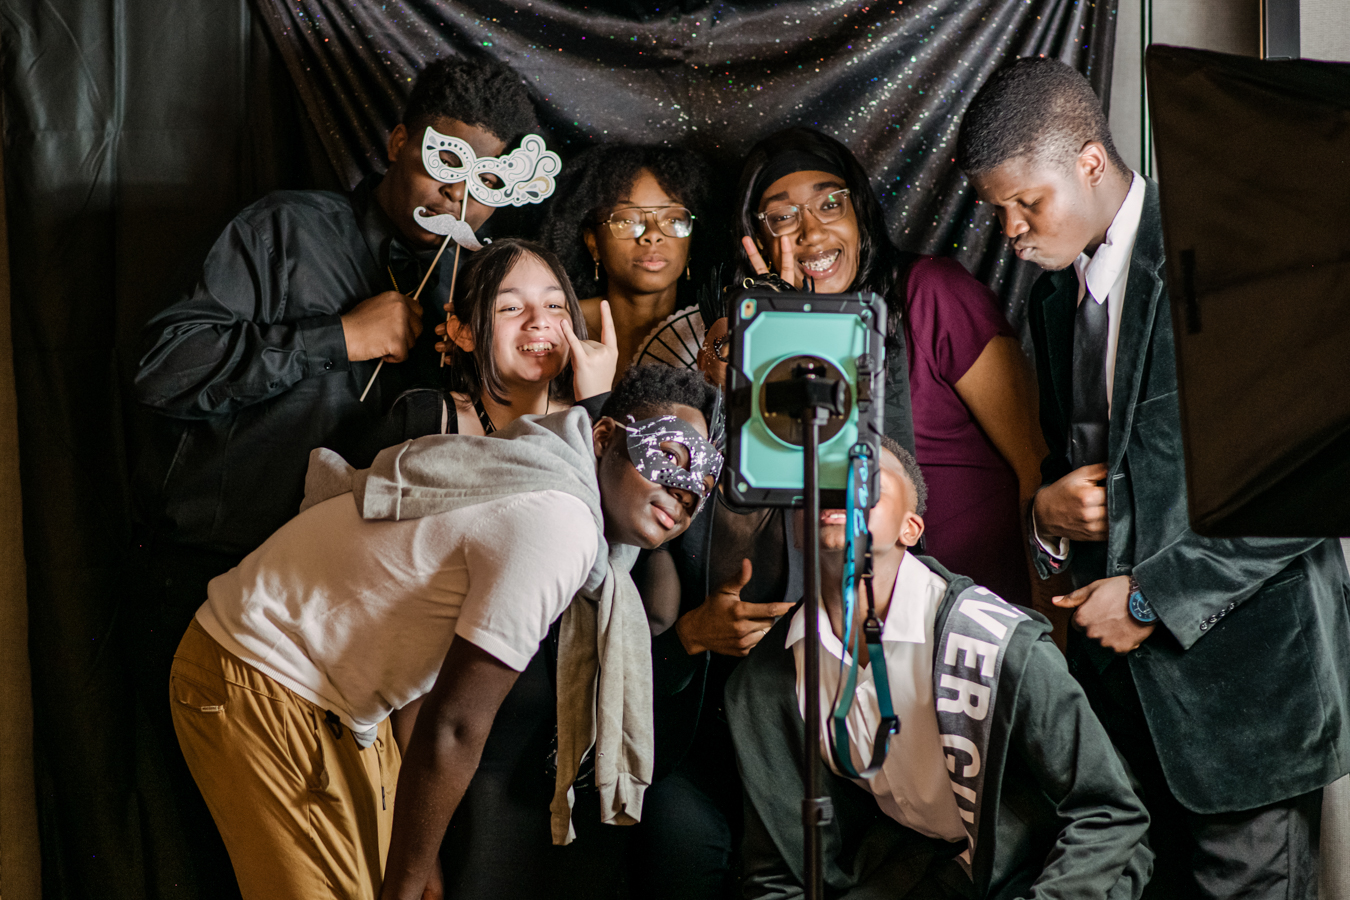 SFNC Interns pose for photo in photobooth